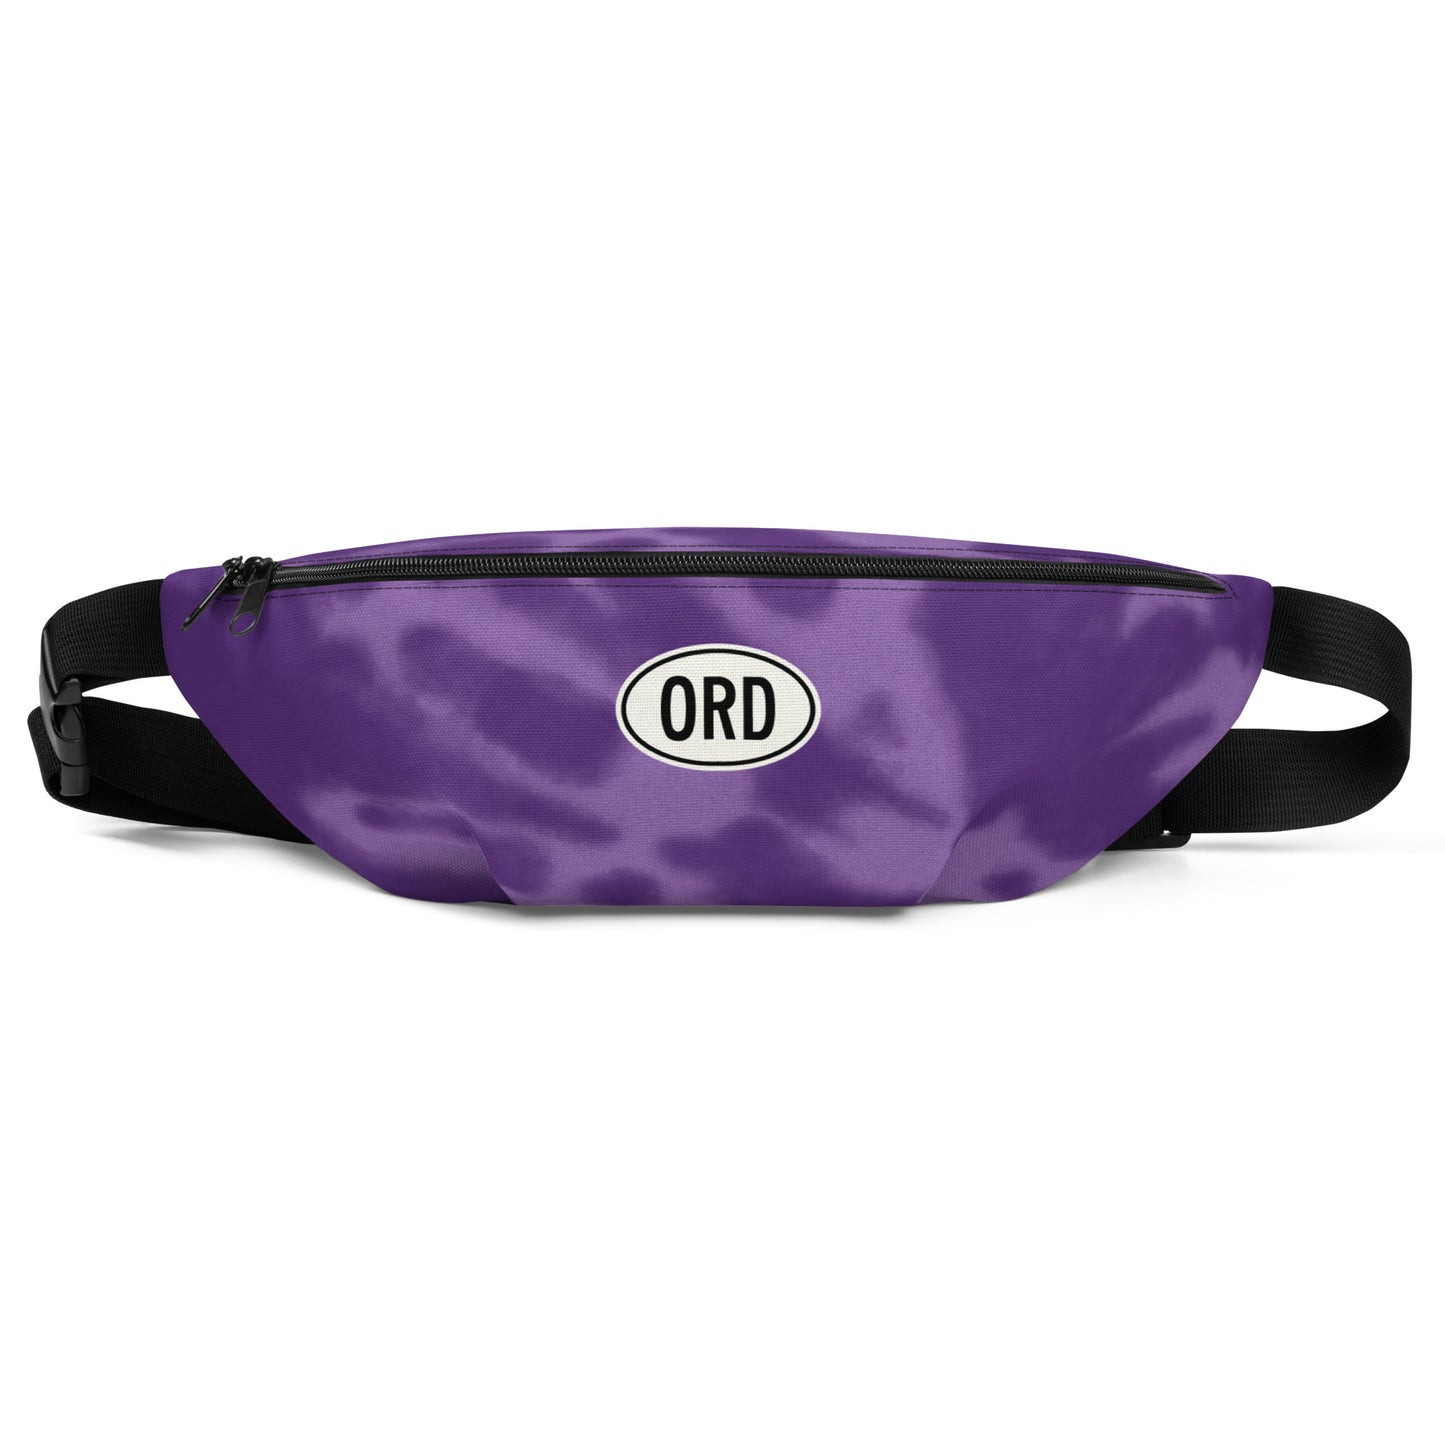 Travel Gift Fanny Pack - Purple Tie-Dye • ORD Chicago • YHM Designs - Image 01